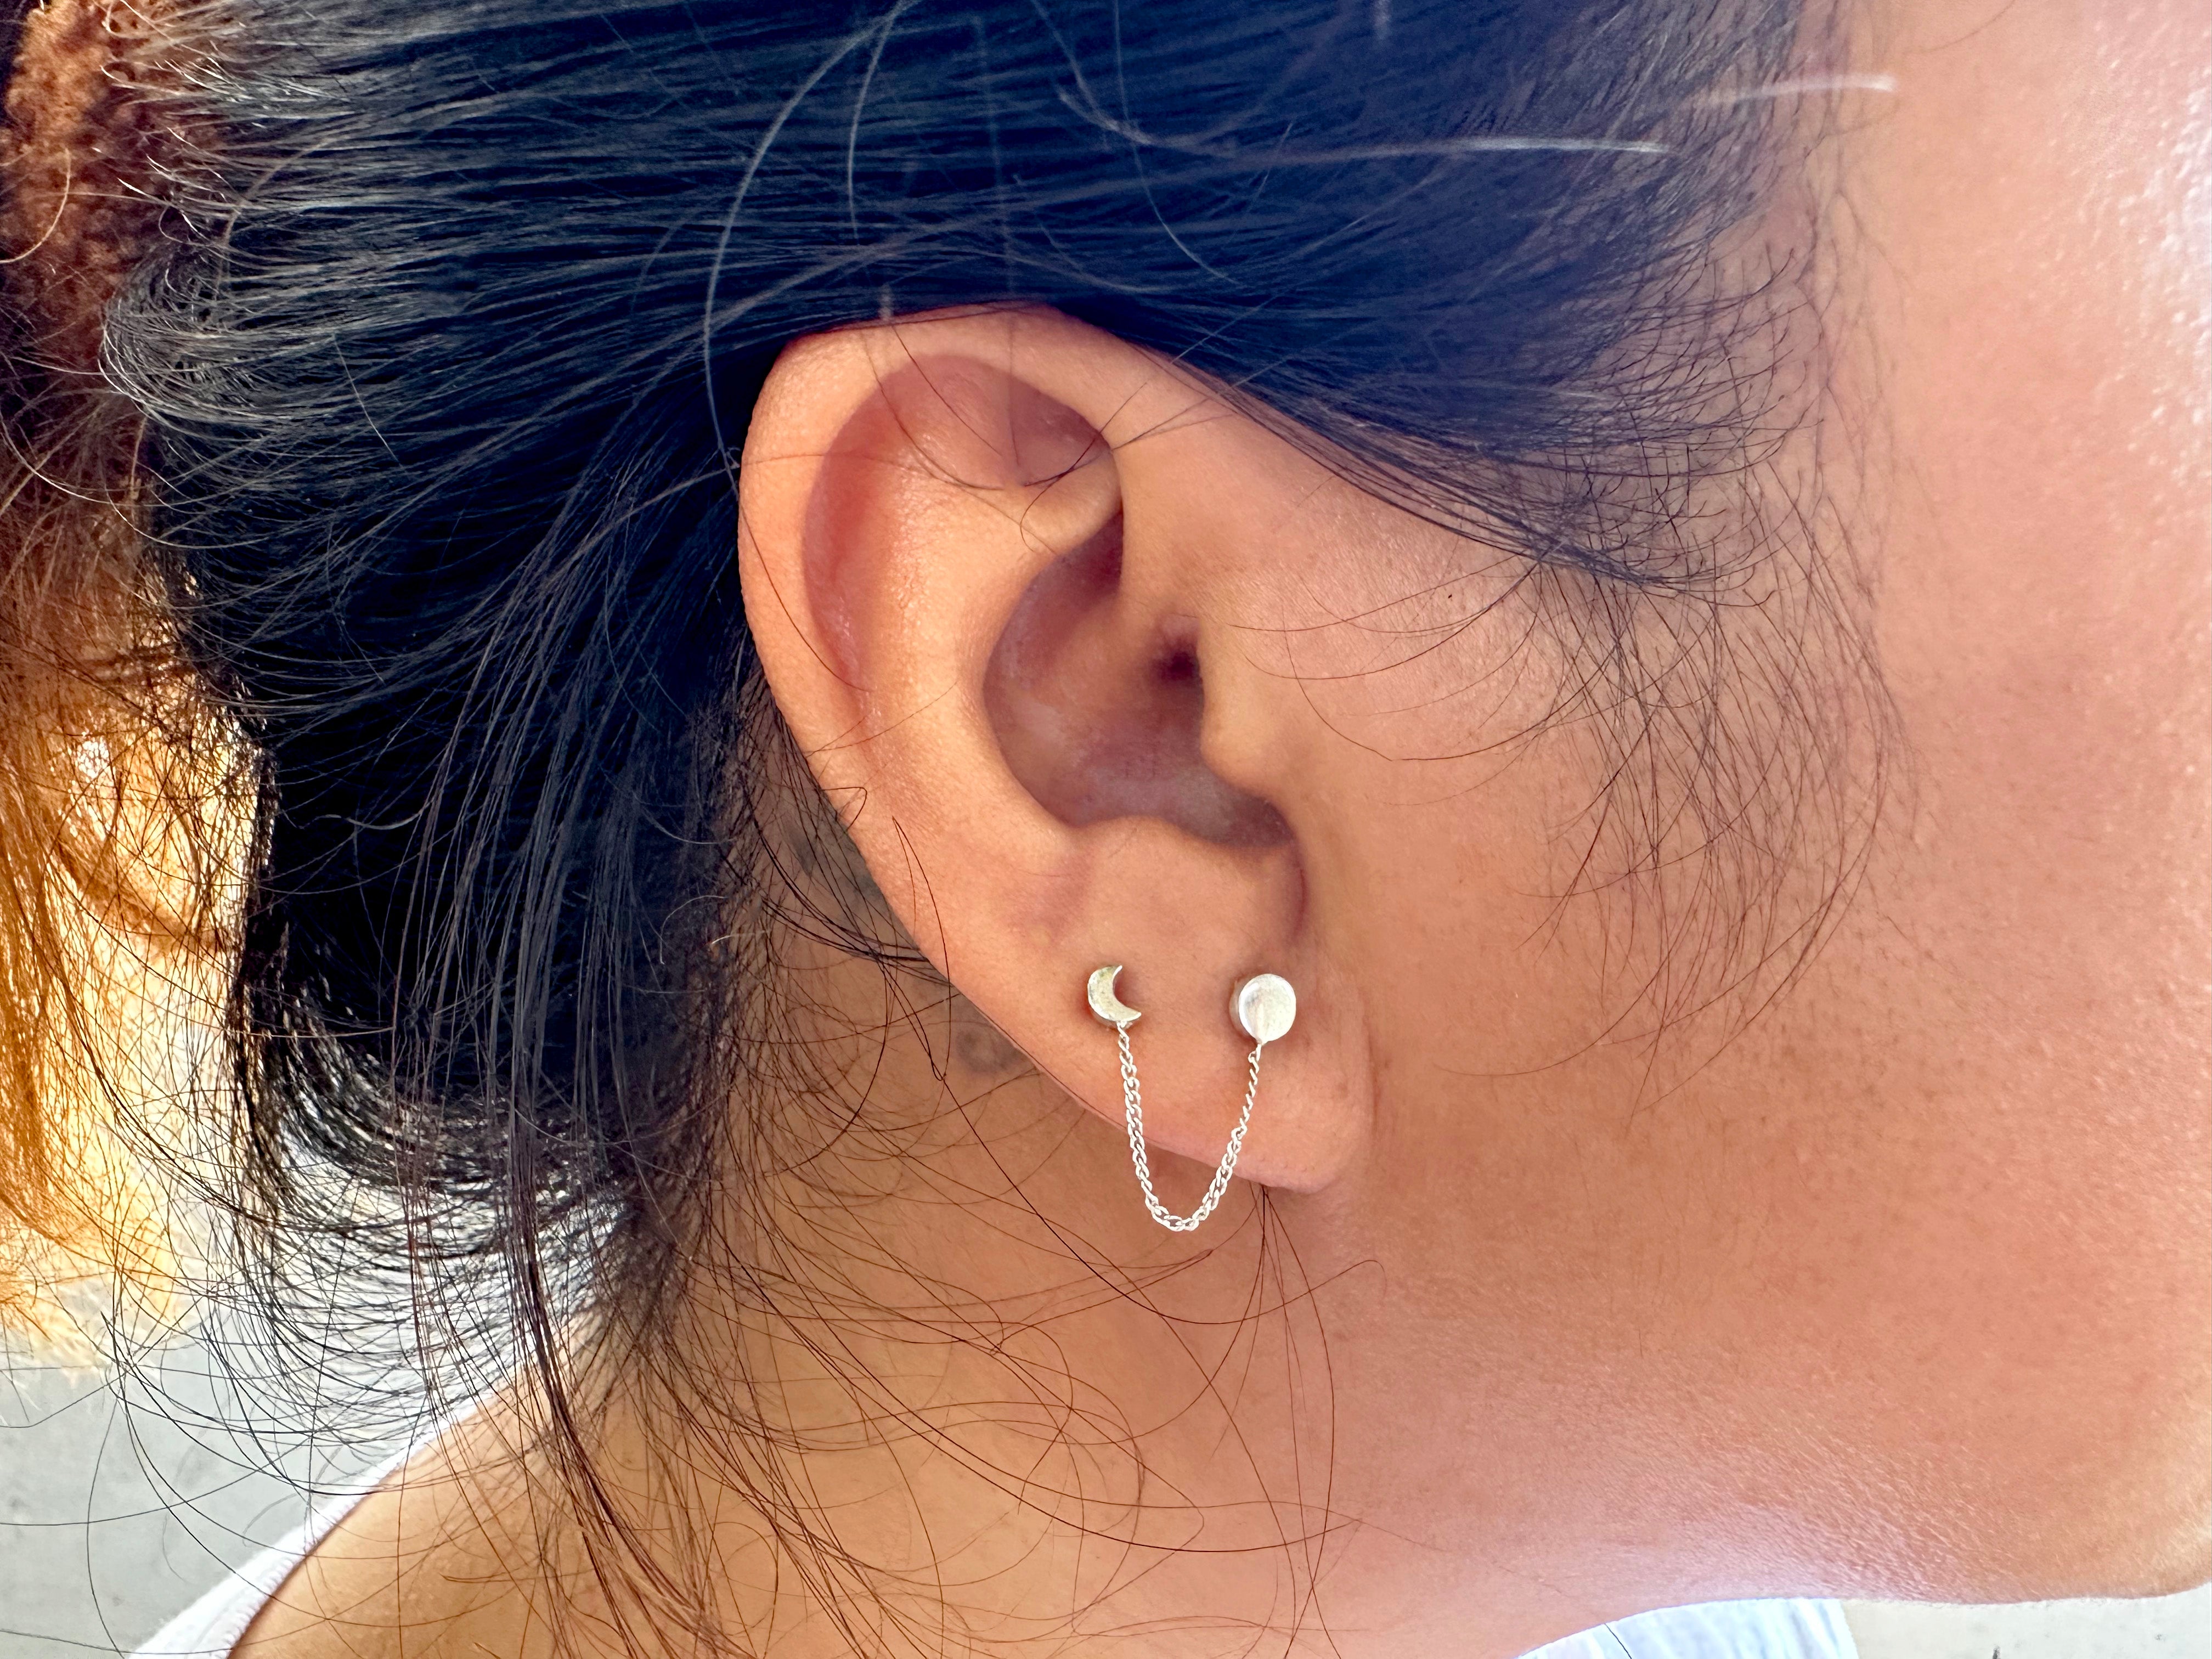 Double Ear Piercing Everything You Need to Know